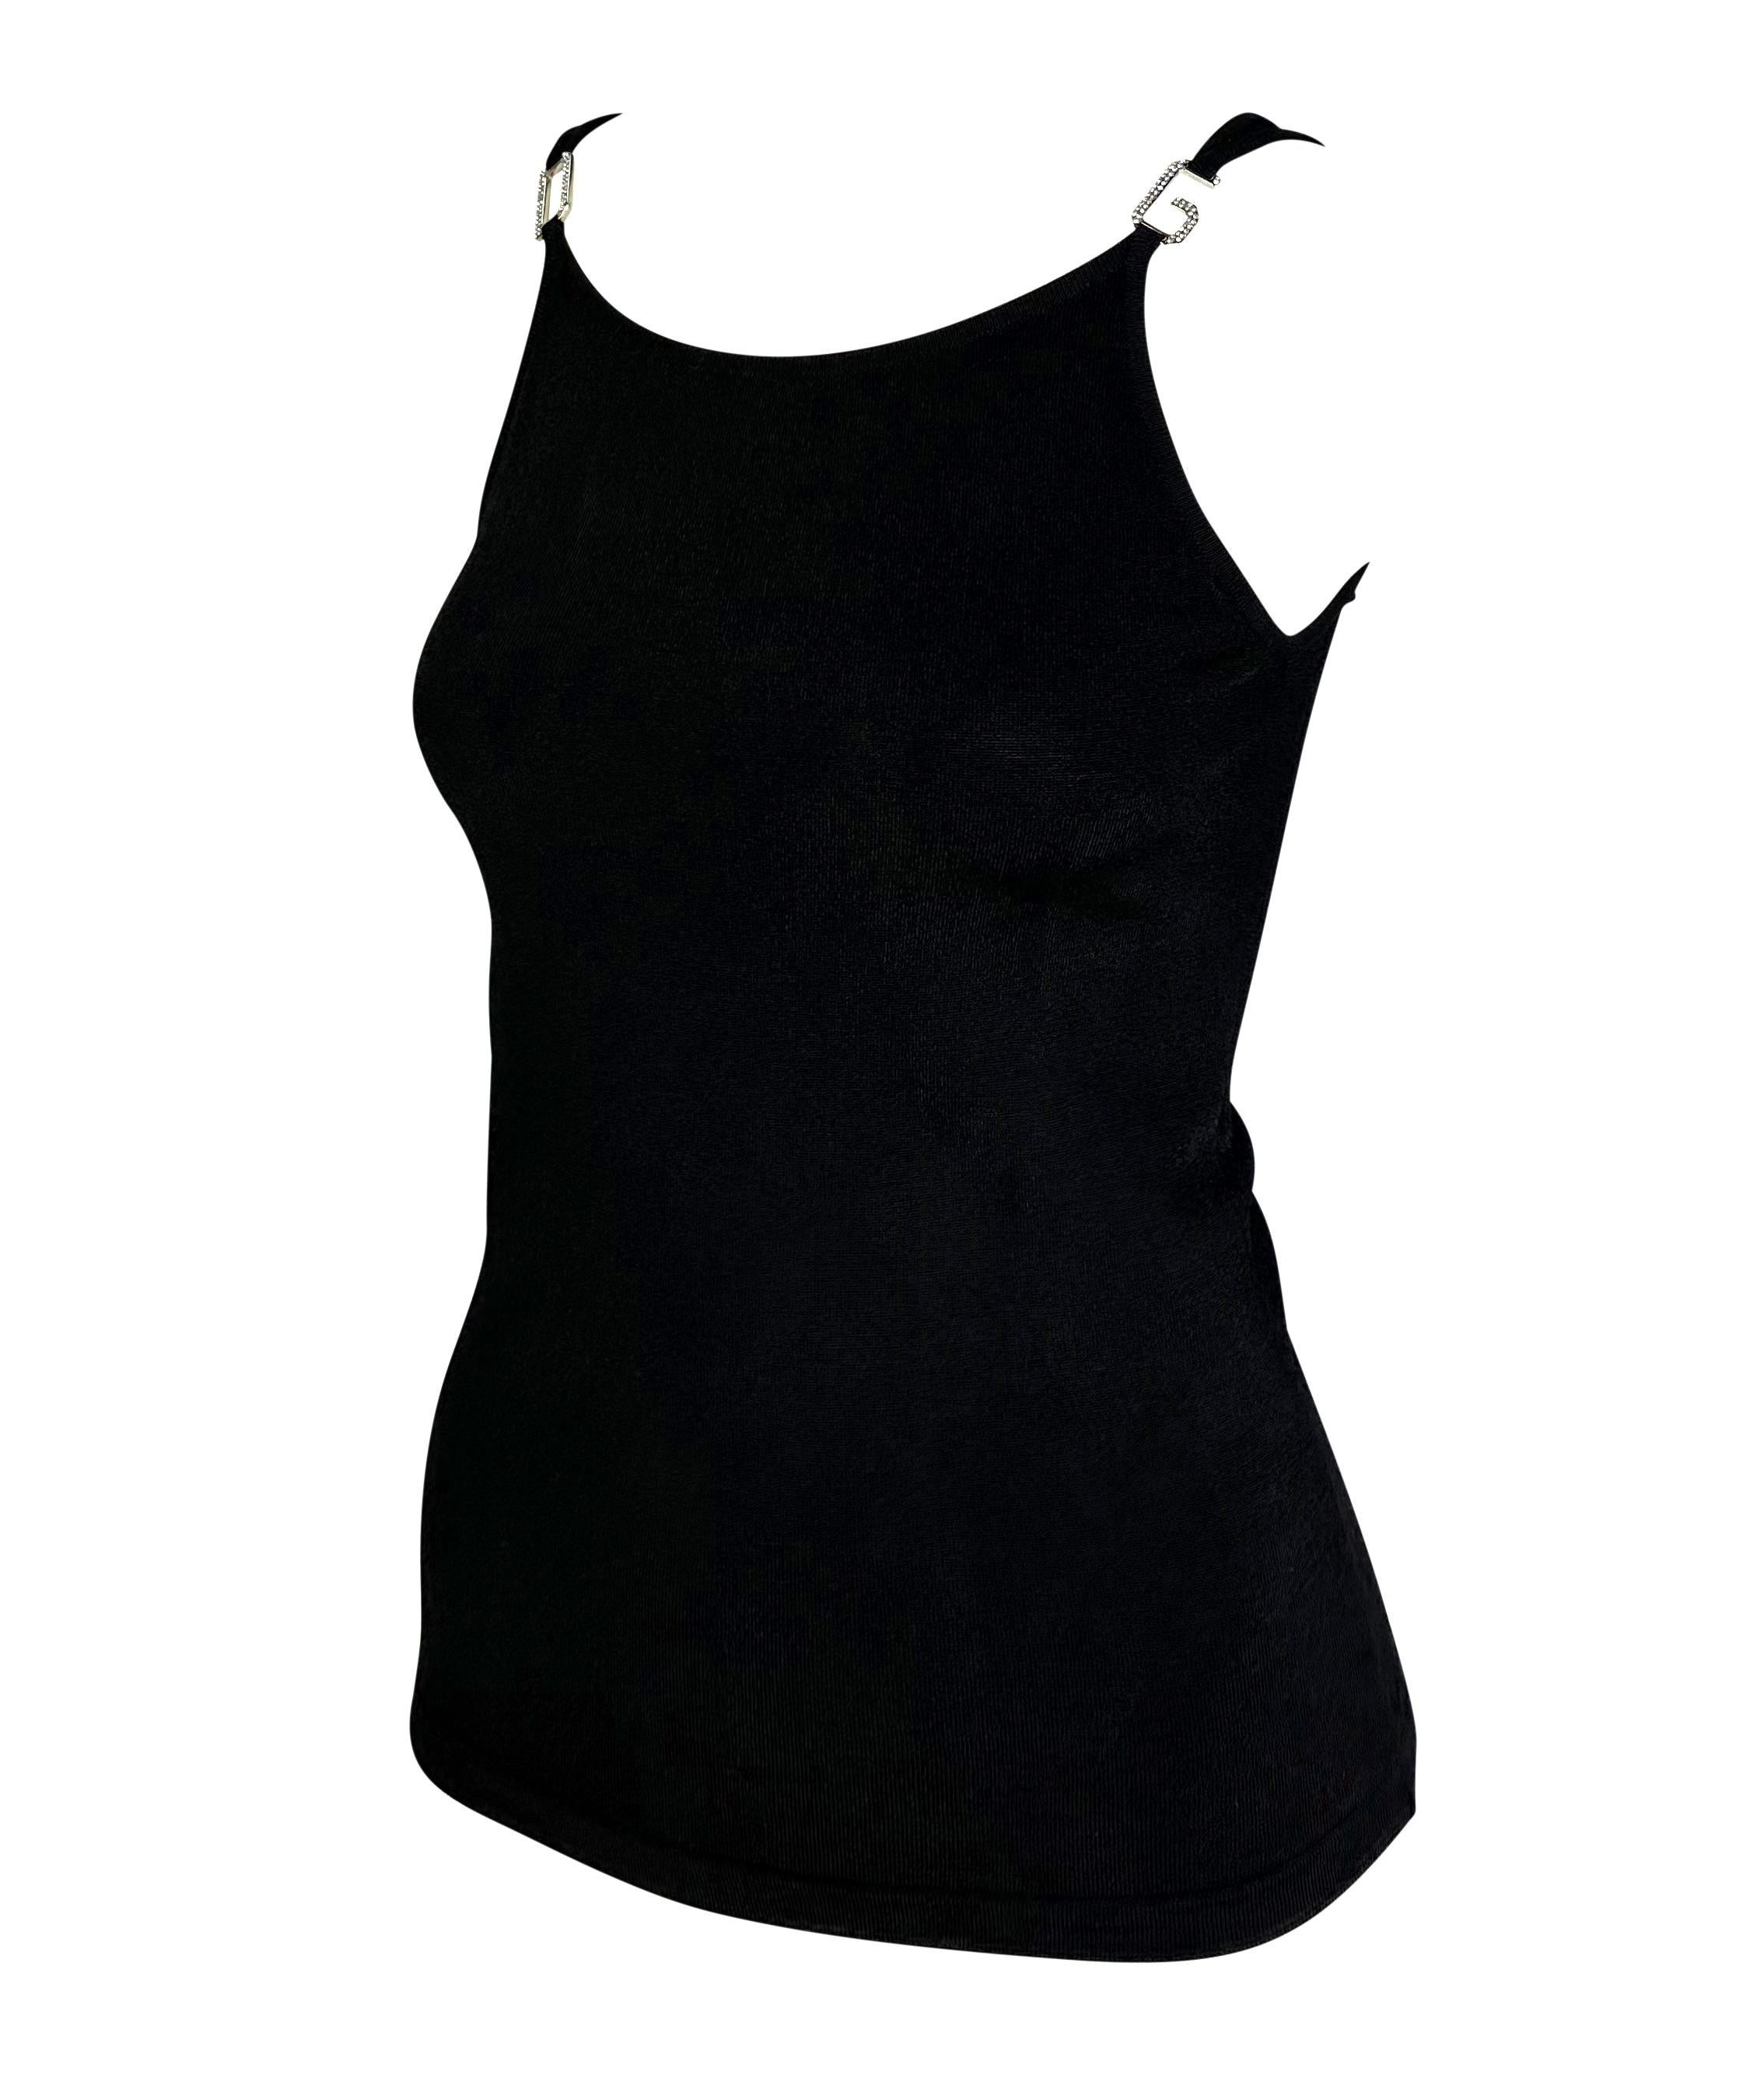 Presenting a beautiful black Dolce and Gabbana tank top. From the early 2000s, this top features a wide scoop neckline and back and is made complete with rhinestone accented 'D' and 'G' buckles on either strap. Add this perfectly elevated tank top